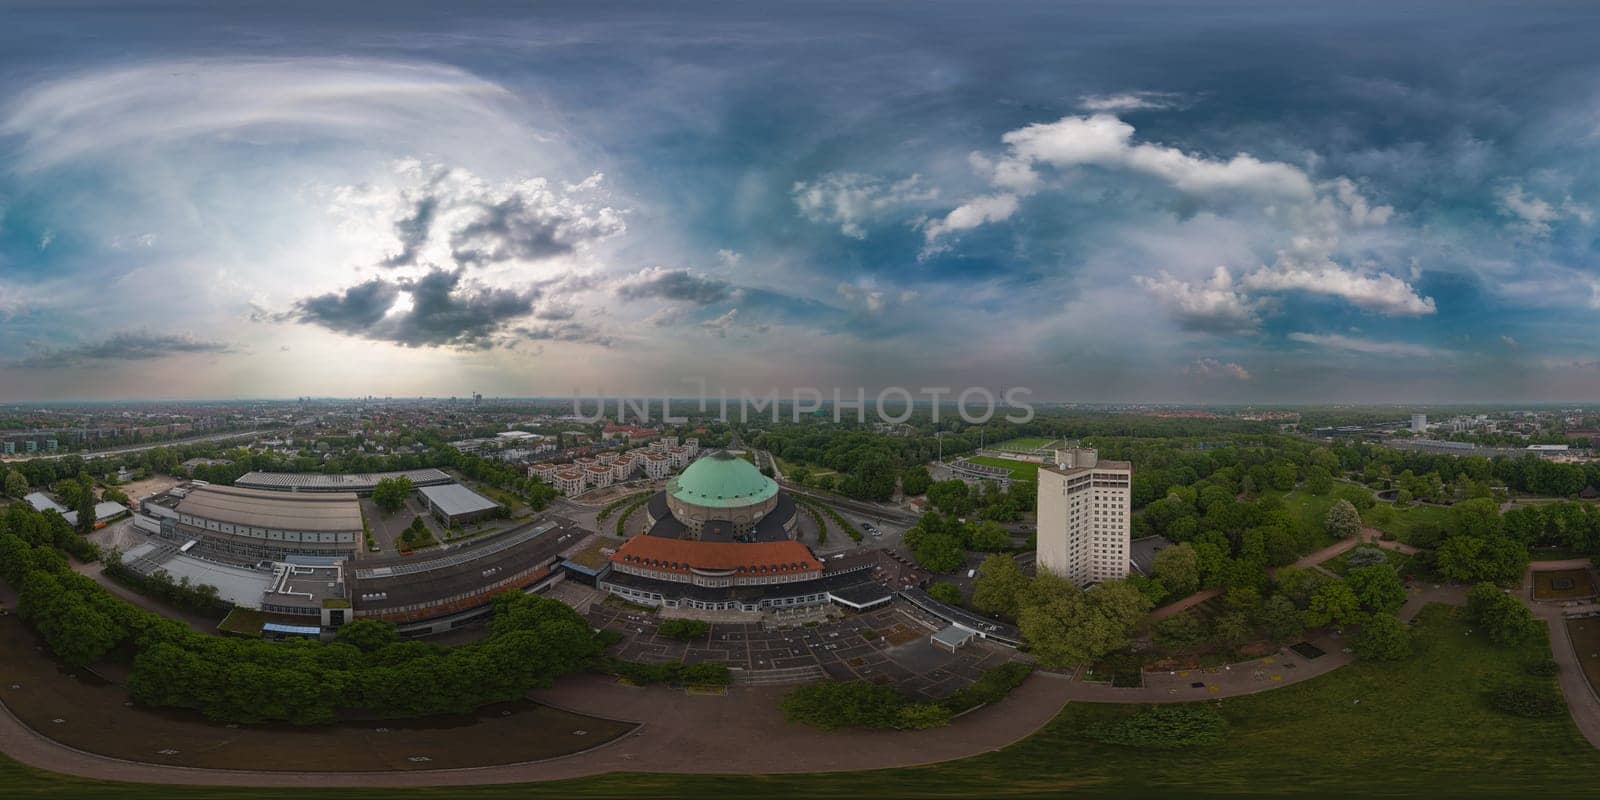 Hanover, Lower Saxony / Germany - May 24, 2023: Aerial view of the Hanover Congress Center. Hanover is the capital of the Lower Saxony region in Germany